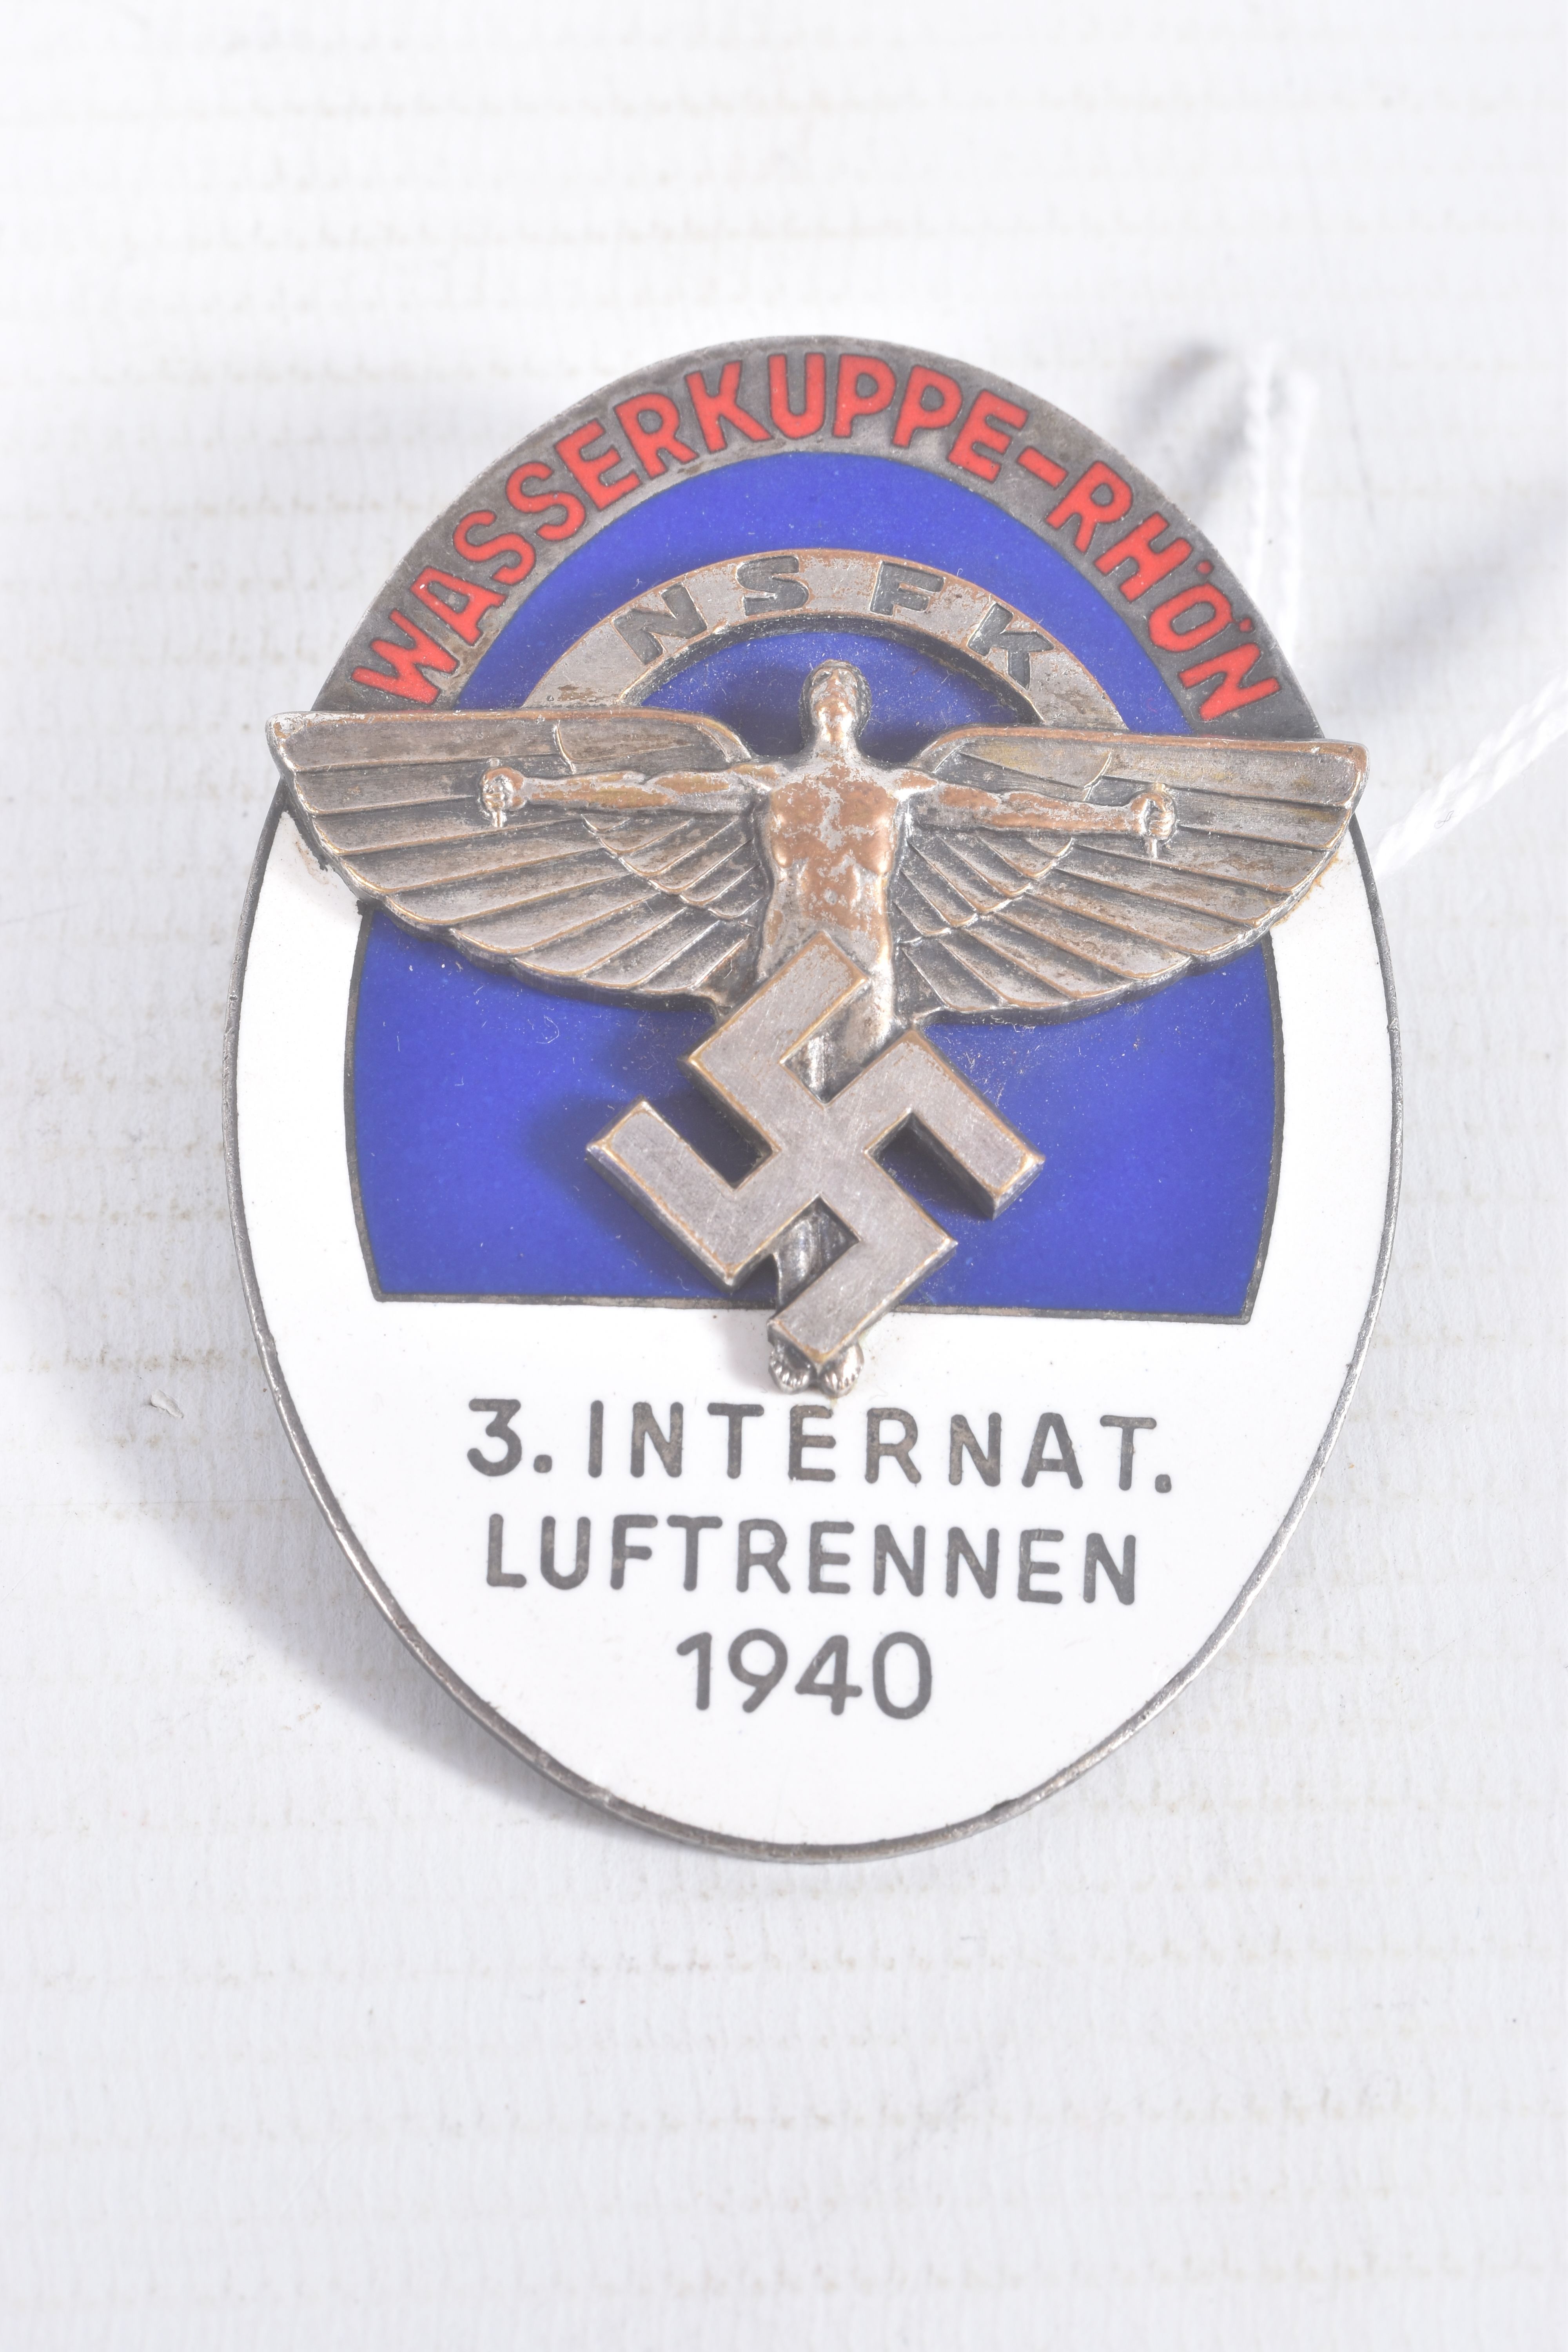 A THIRD REICH GERMAN LUFTWAFFE FLYERS CORPS BADGE - Image 2 of 3